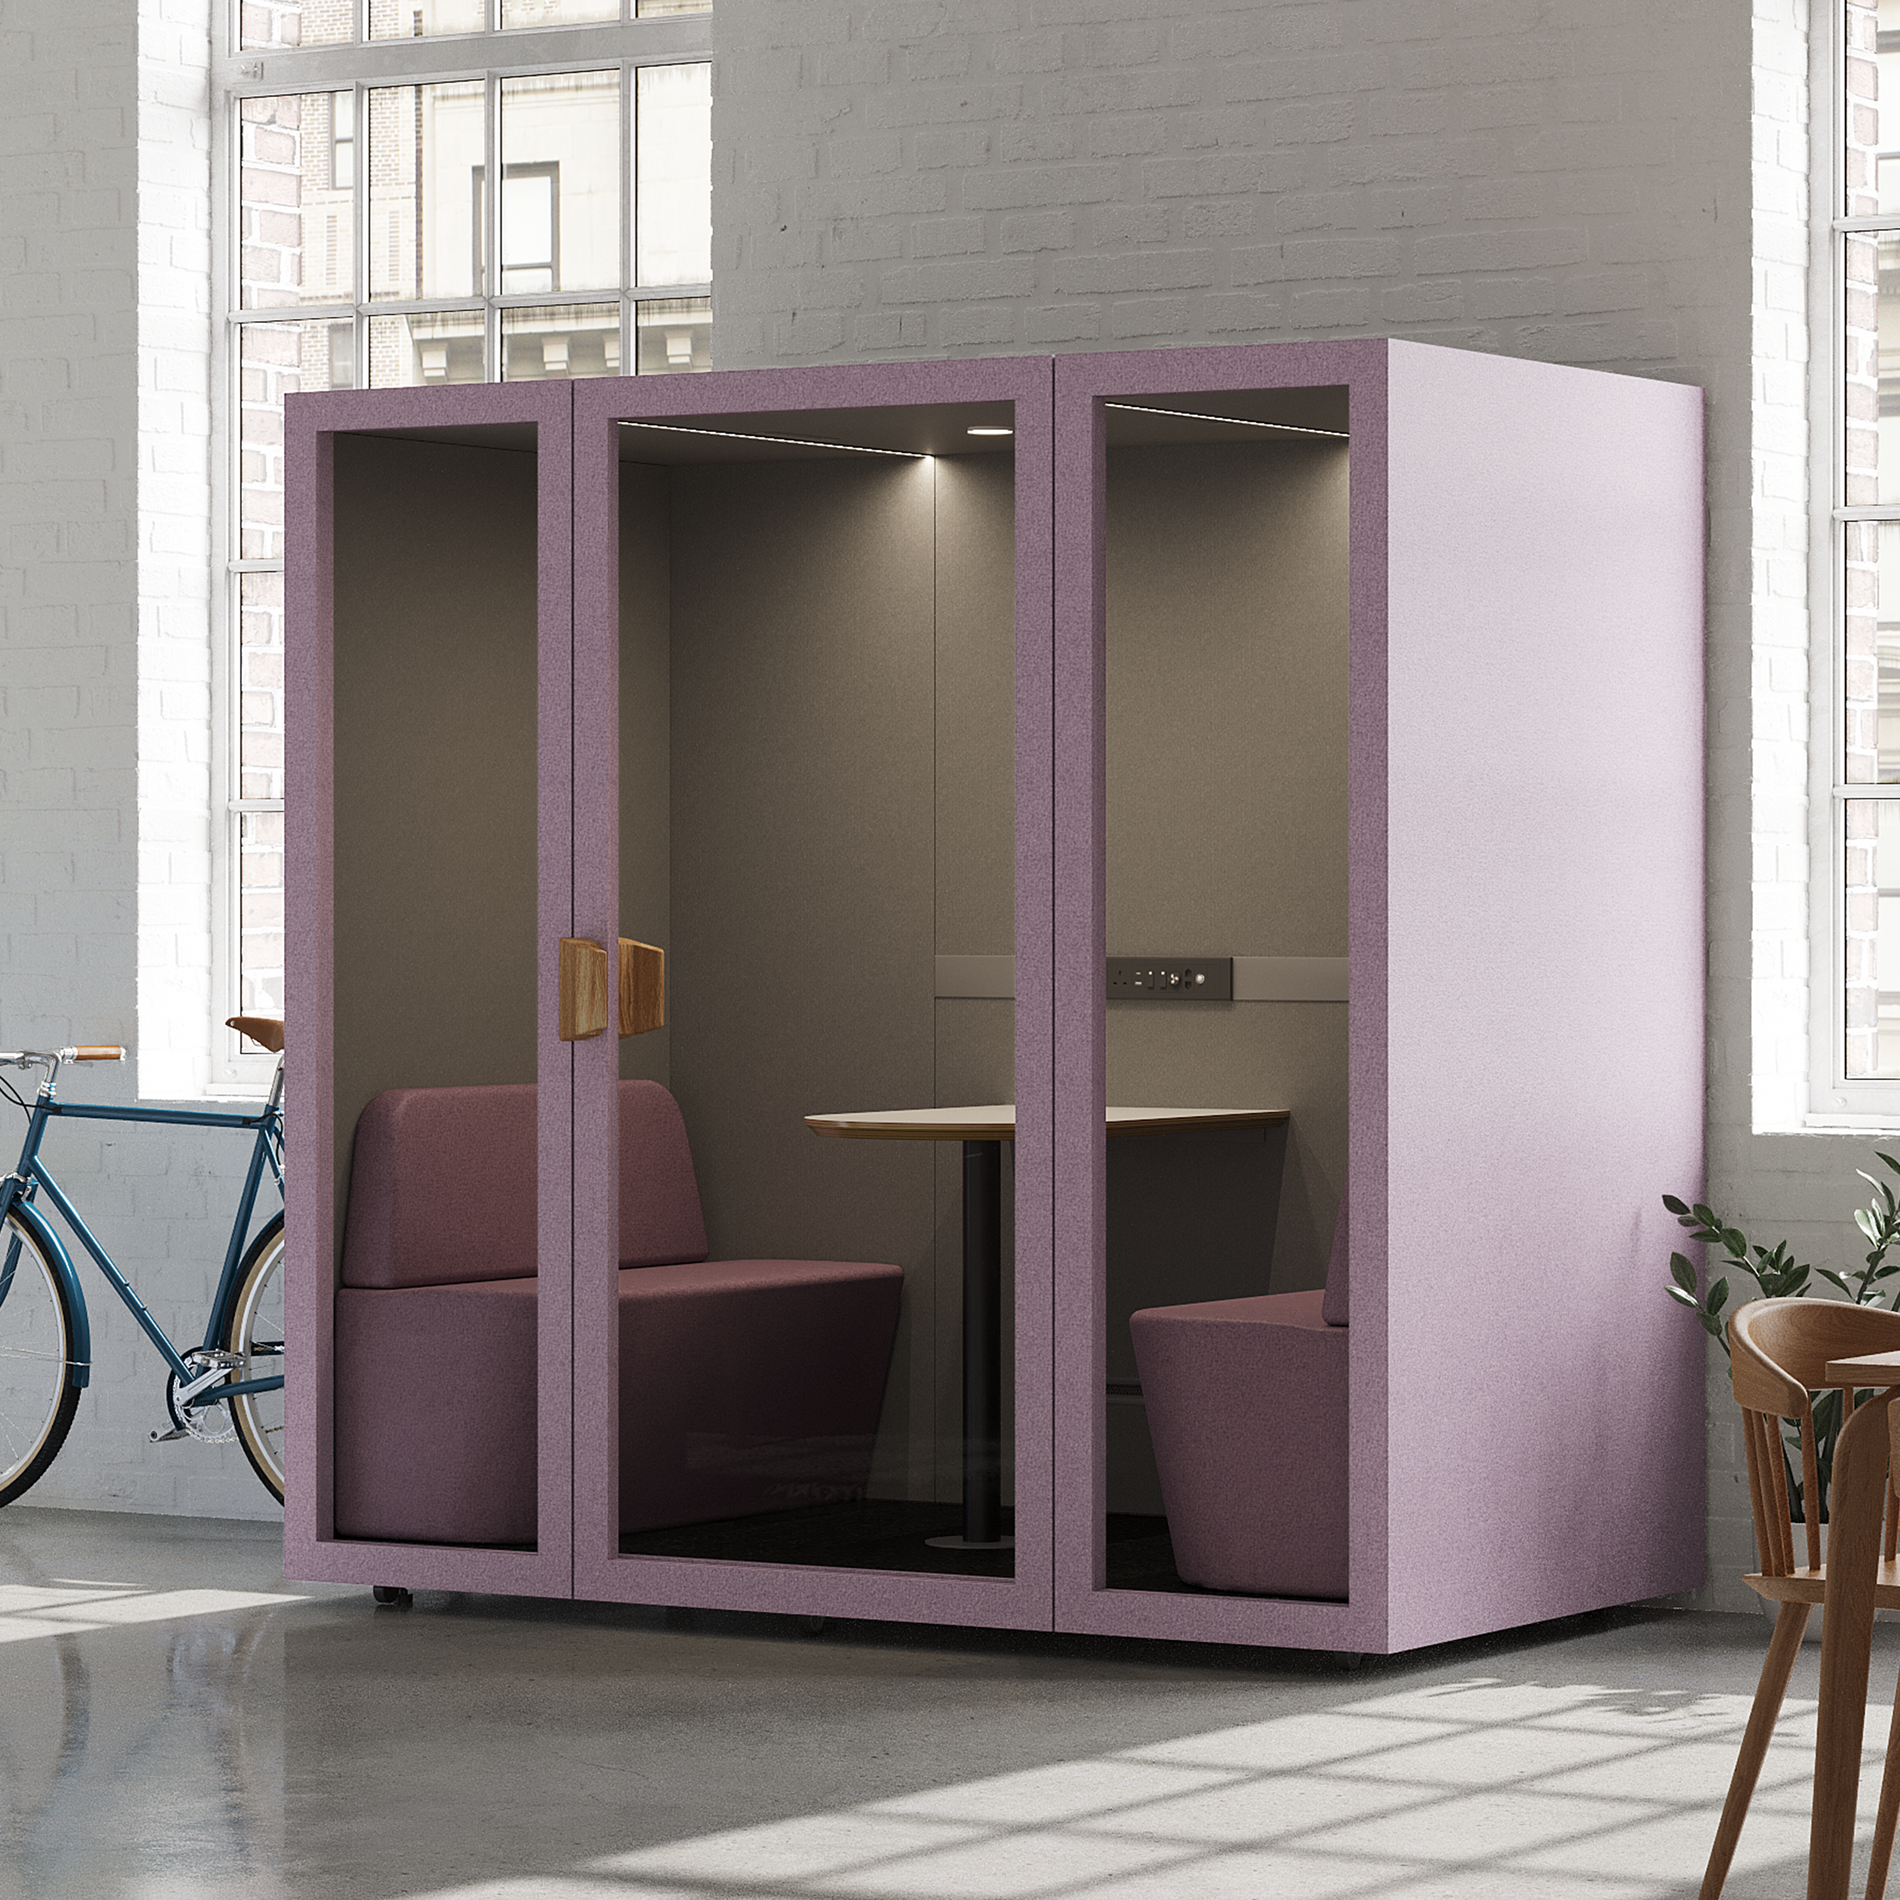 2 - 4 Person Meeting BoothFolio Blush / Furniture As Per Images